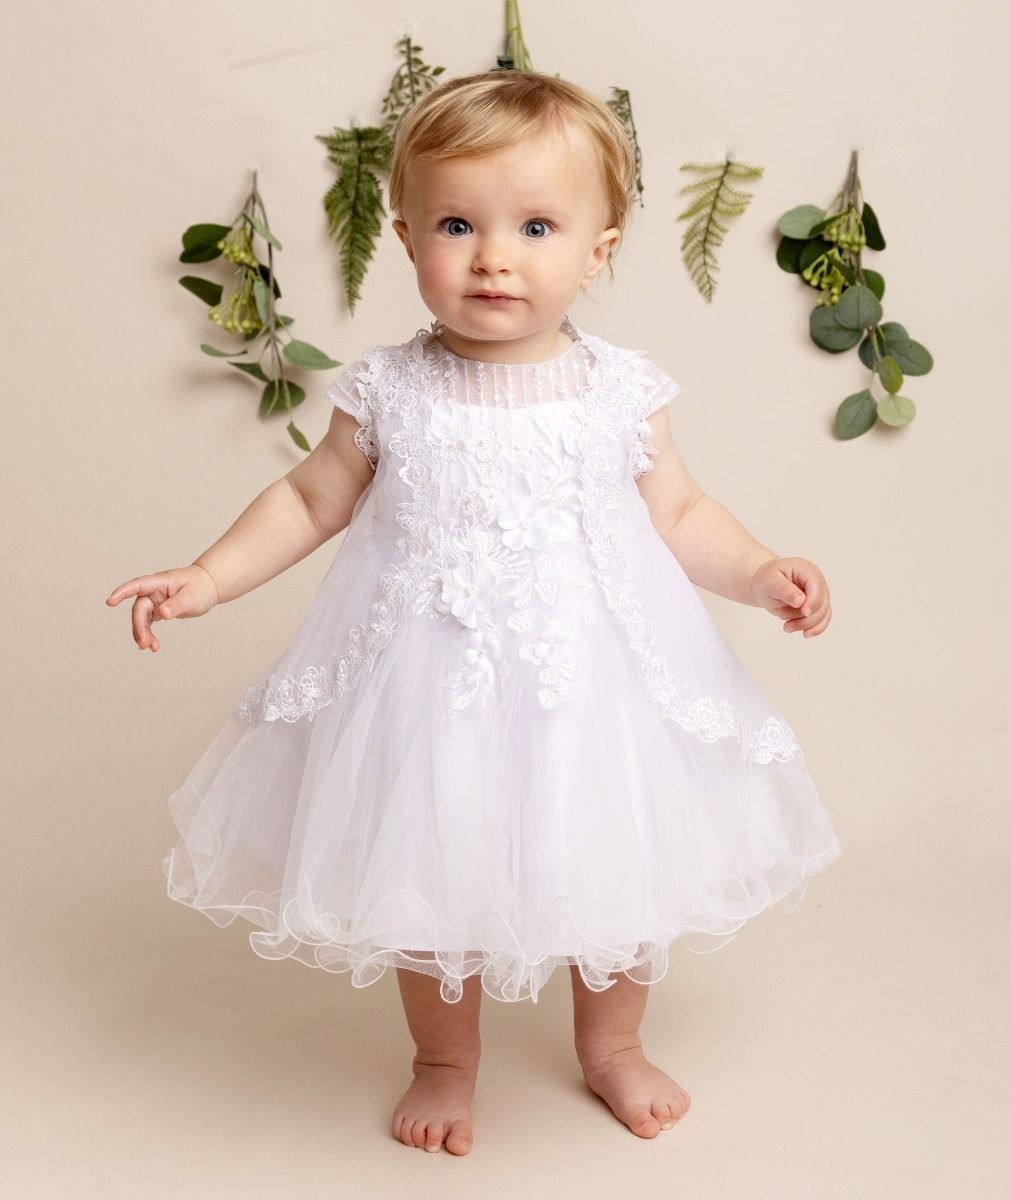 Baby Girls White Tulle & Lace Christening Dress - BONNIE